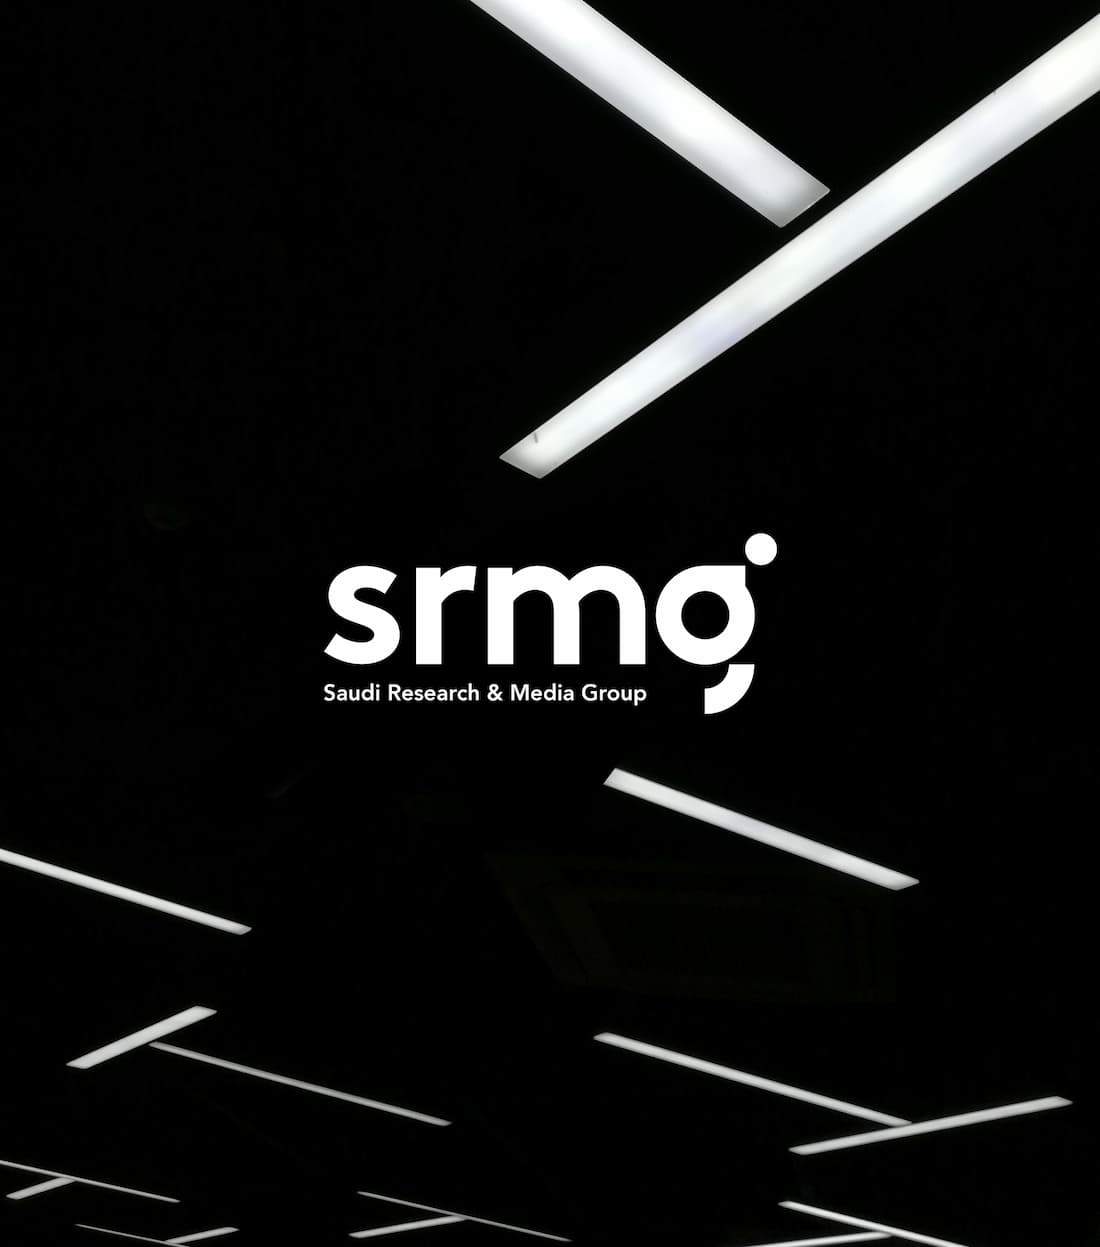 SRMG unit inks SAR 252 mln contract to provide operational service for multiple media platforms